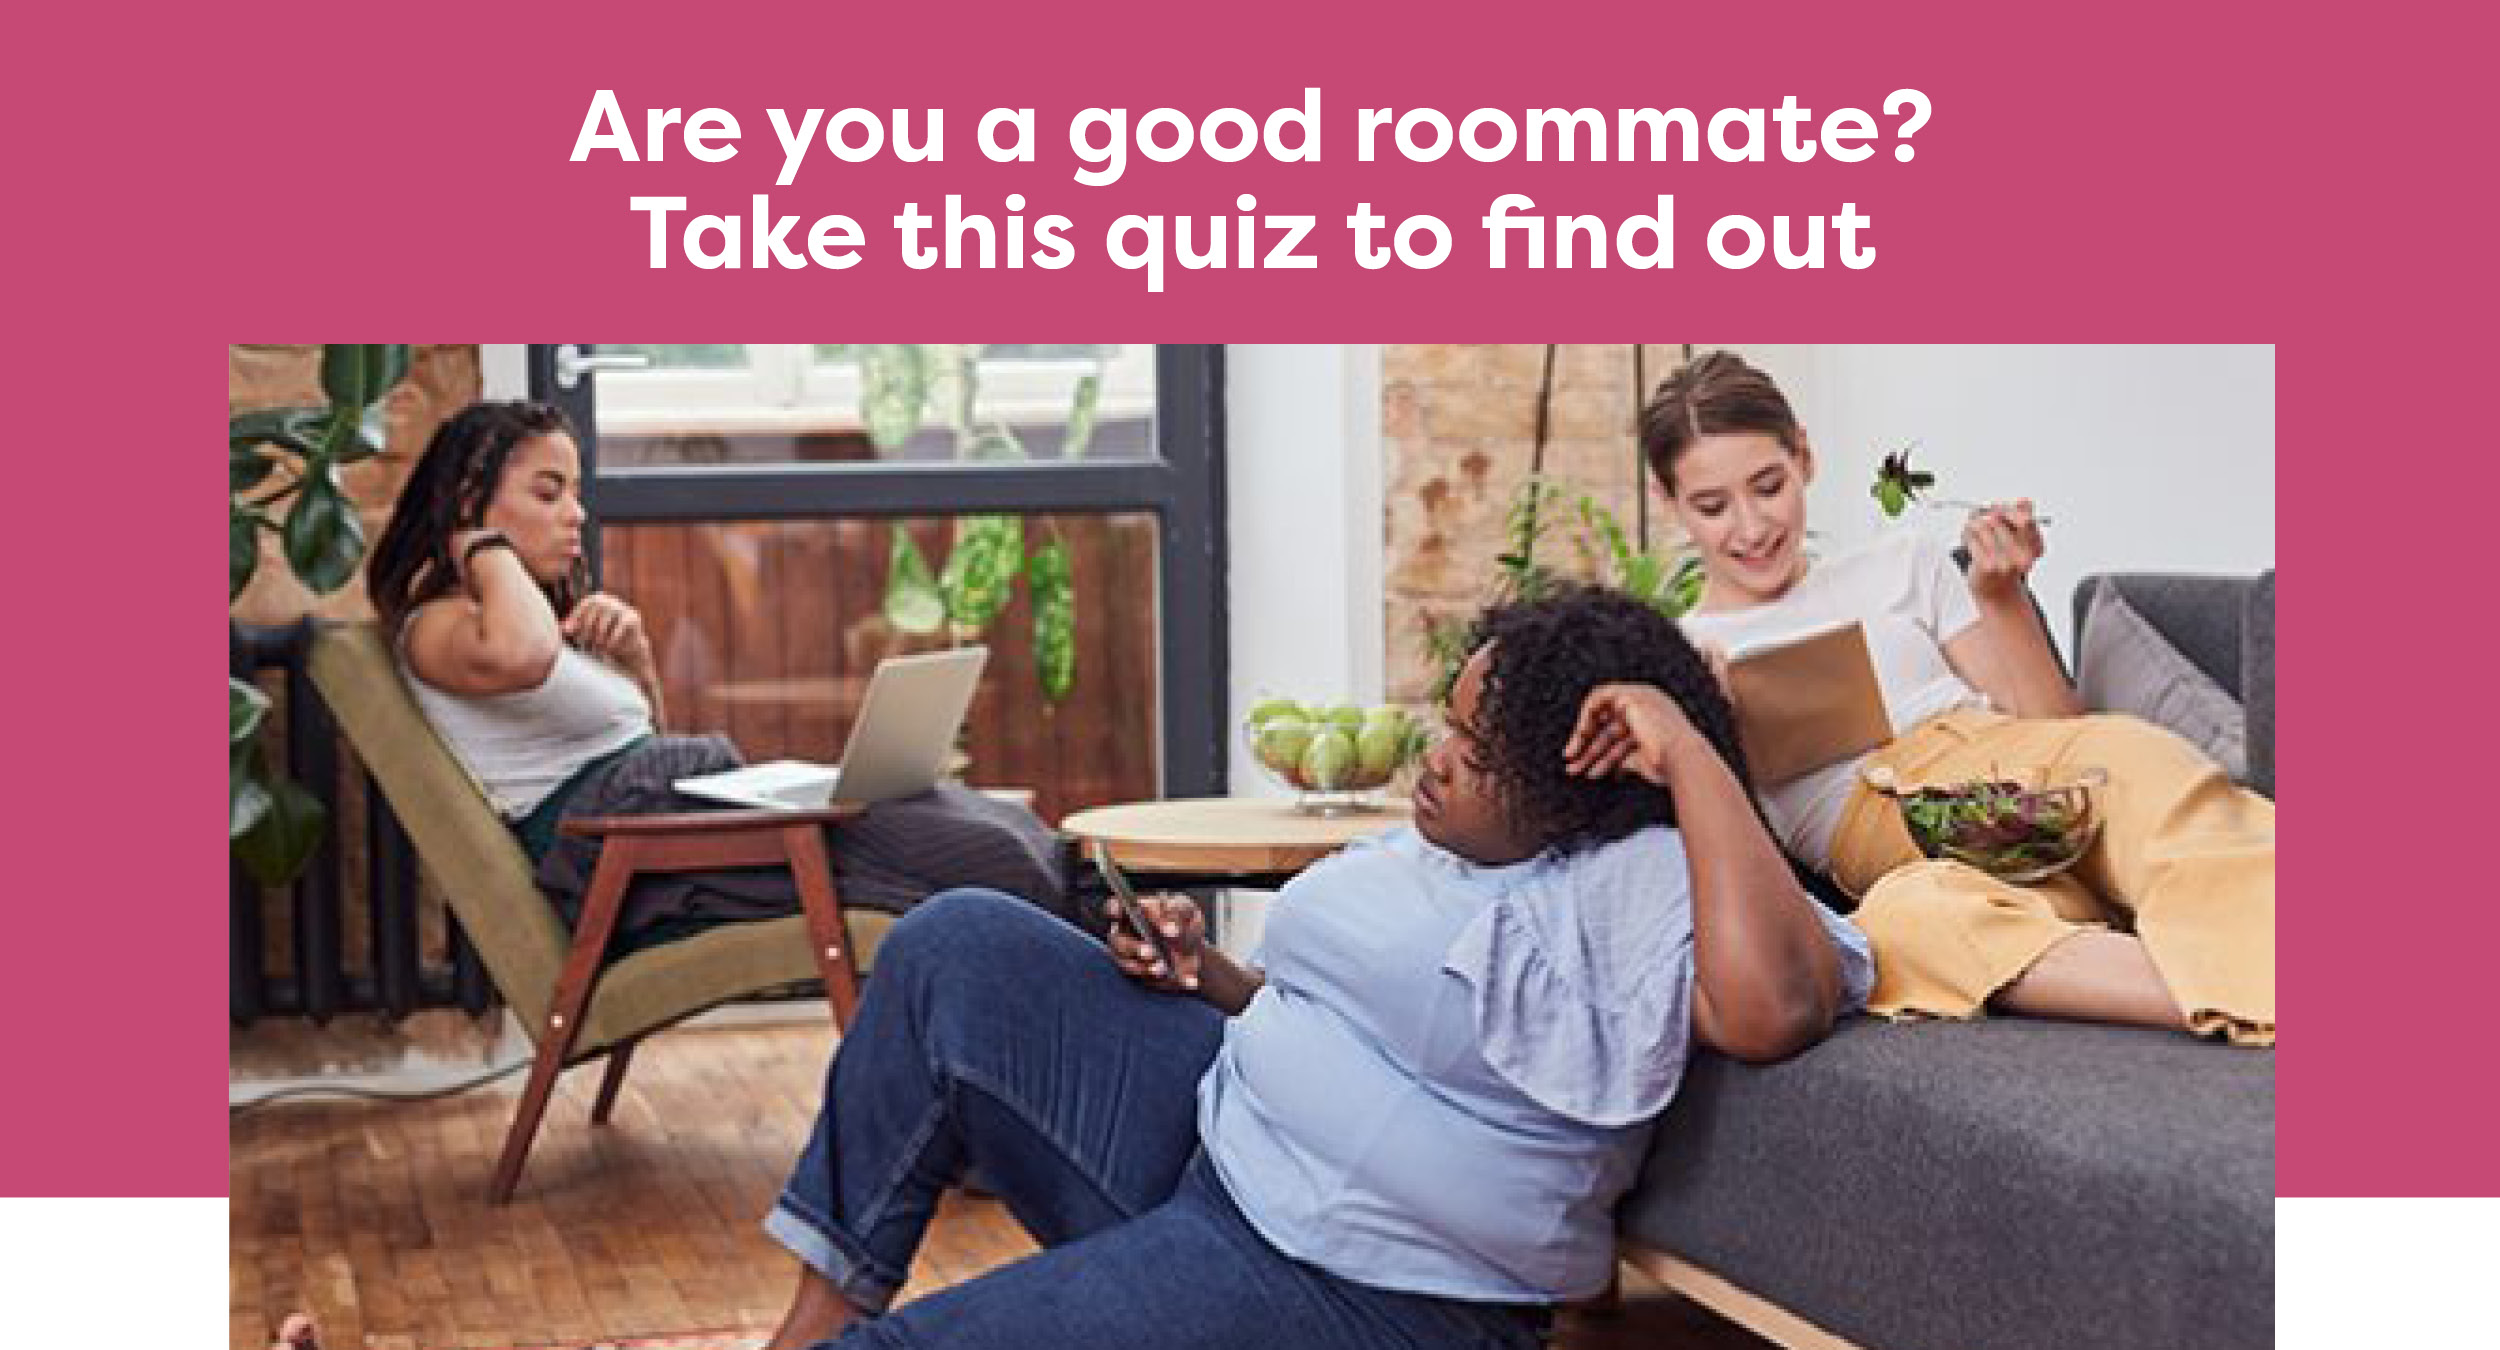 Are you a good roommate? Take this quiz to find out”></a></td>
  </tr>
</table>
	

	
	<table align=